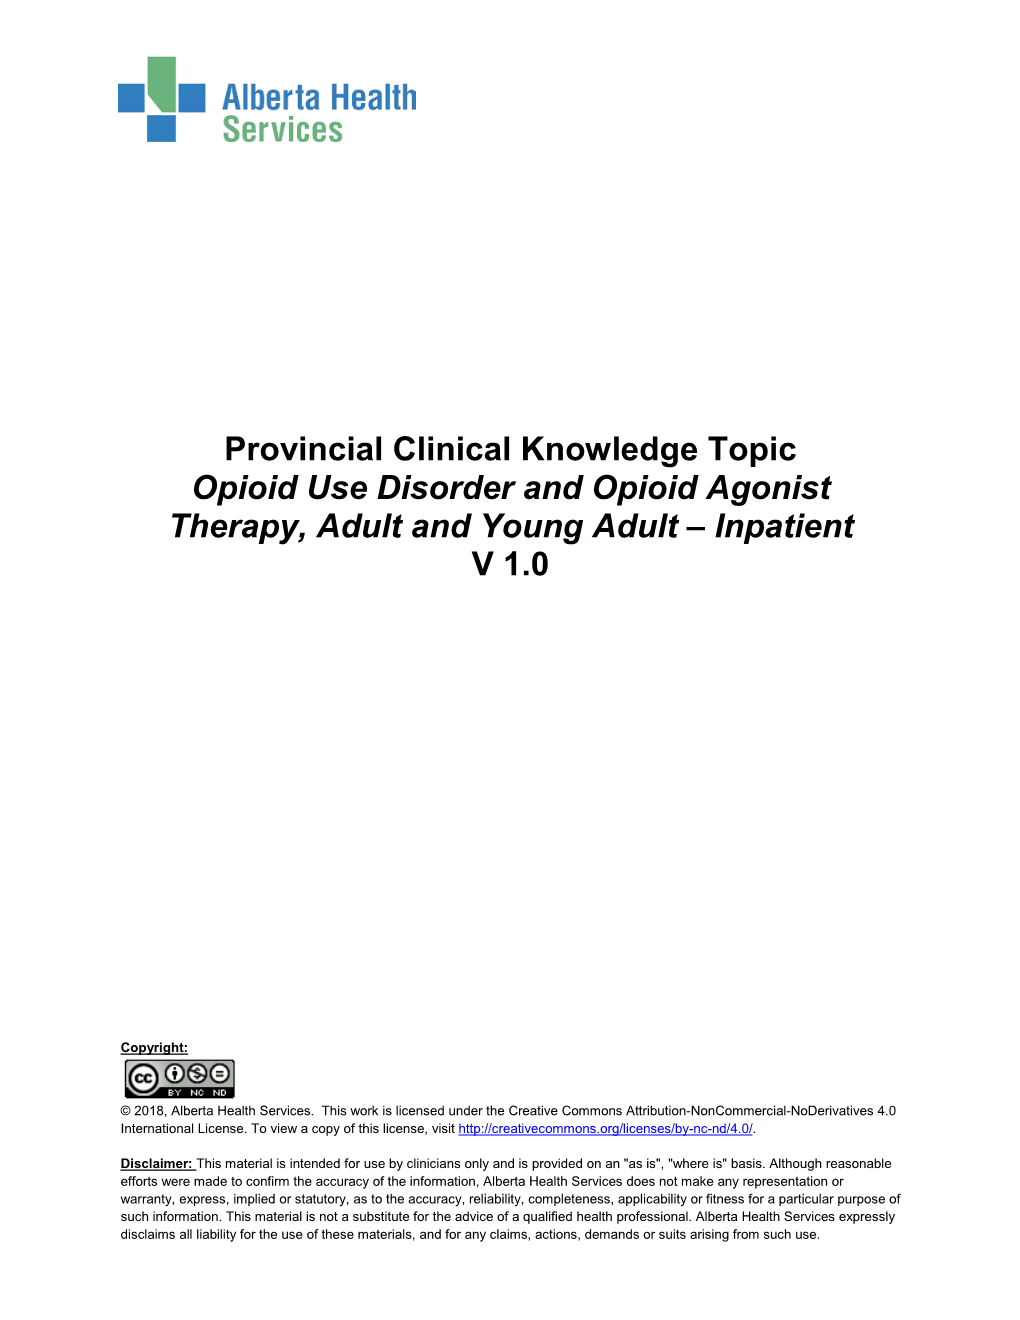 Opioid Agonist Therapy and Opioid Use Disorder, Adult and Young Adult